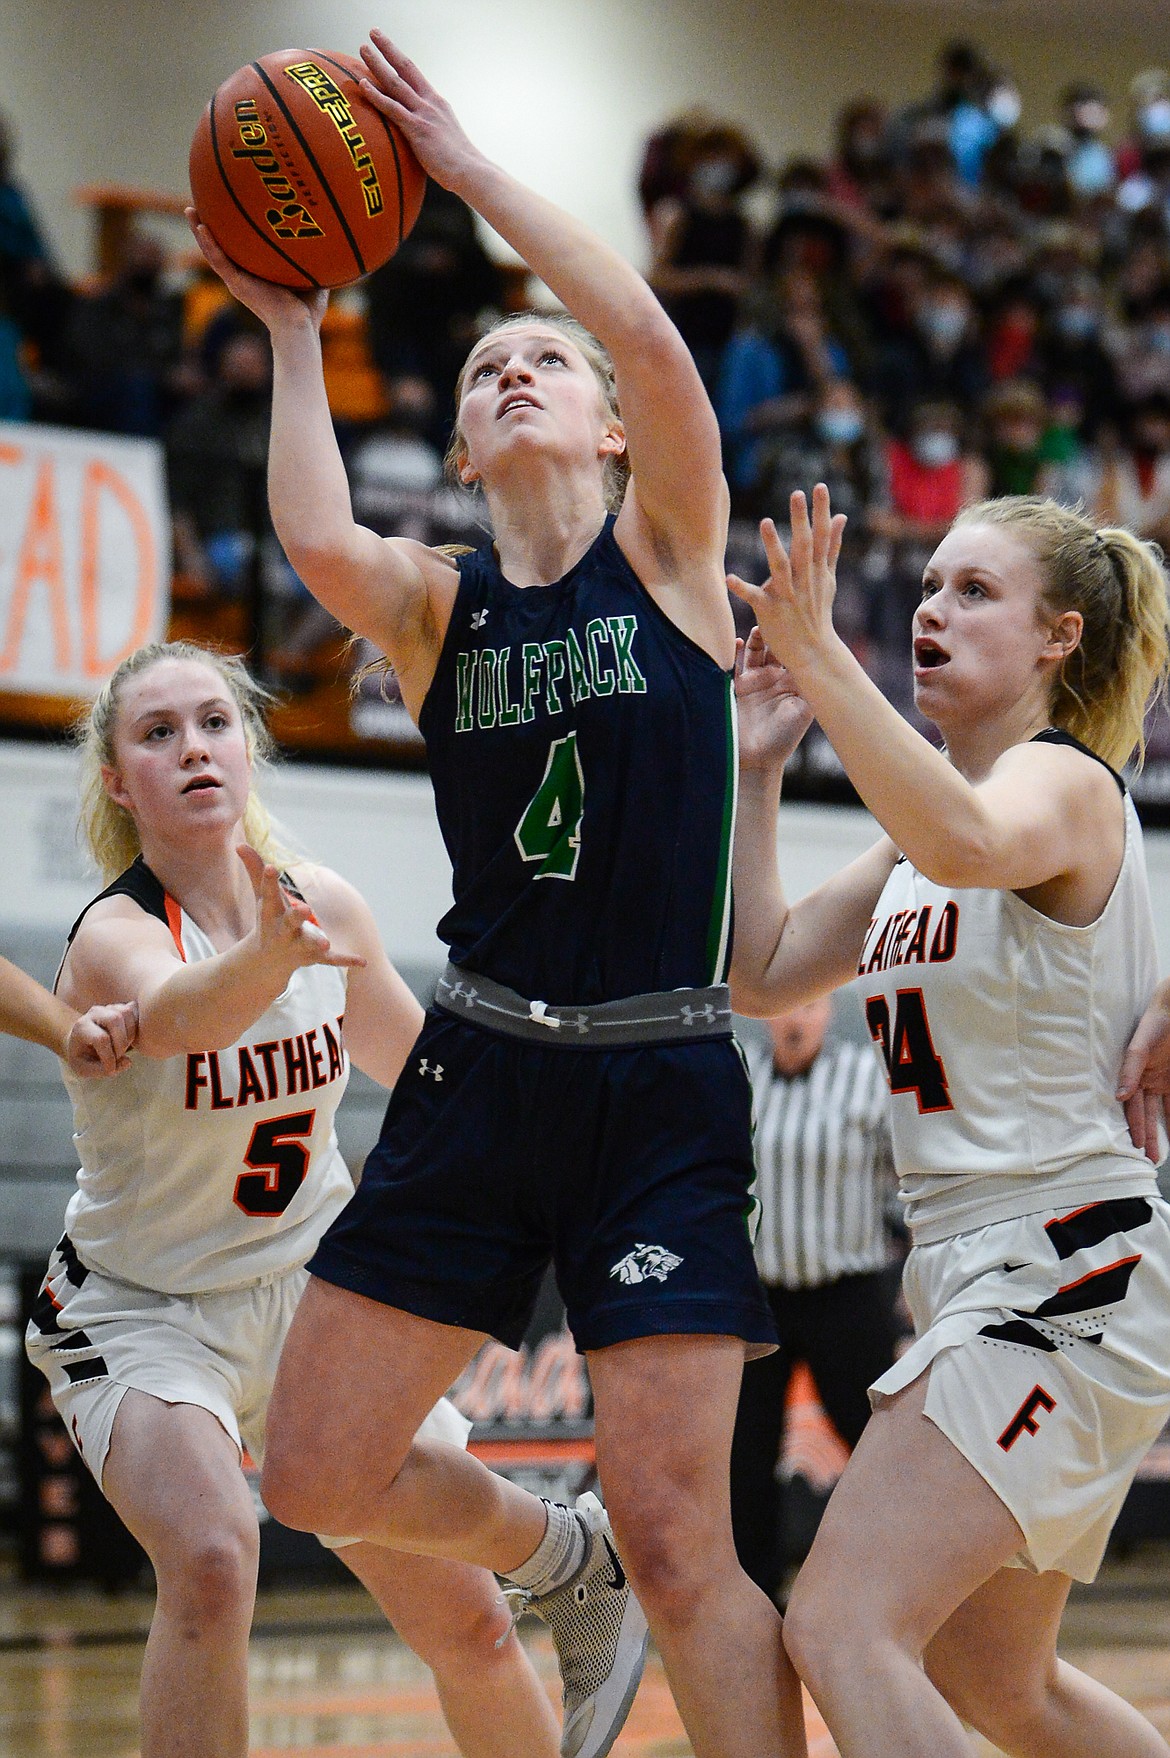 Glacier's Kaylee Fritz (4) goes to the hoop between Flathead's Maddy Moy (5) and Molly Winters (34) at Flathead High School on Thursday. (Casey Kreider/Daily Inter Lake)